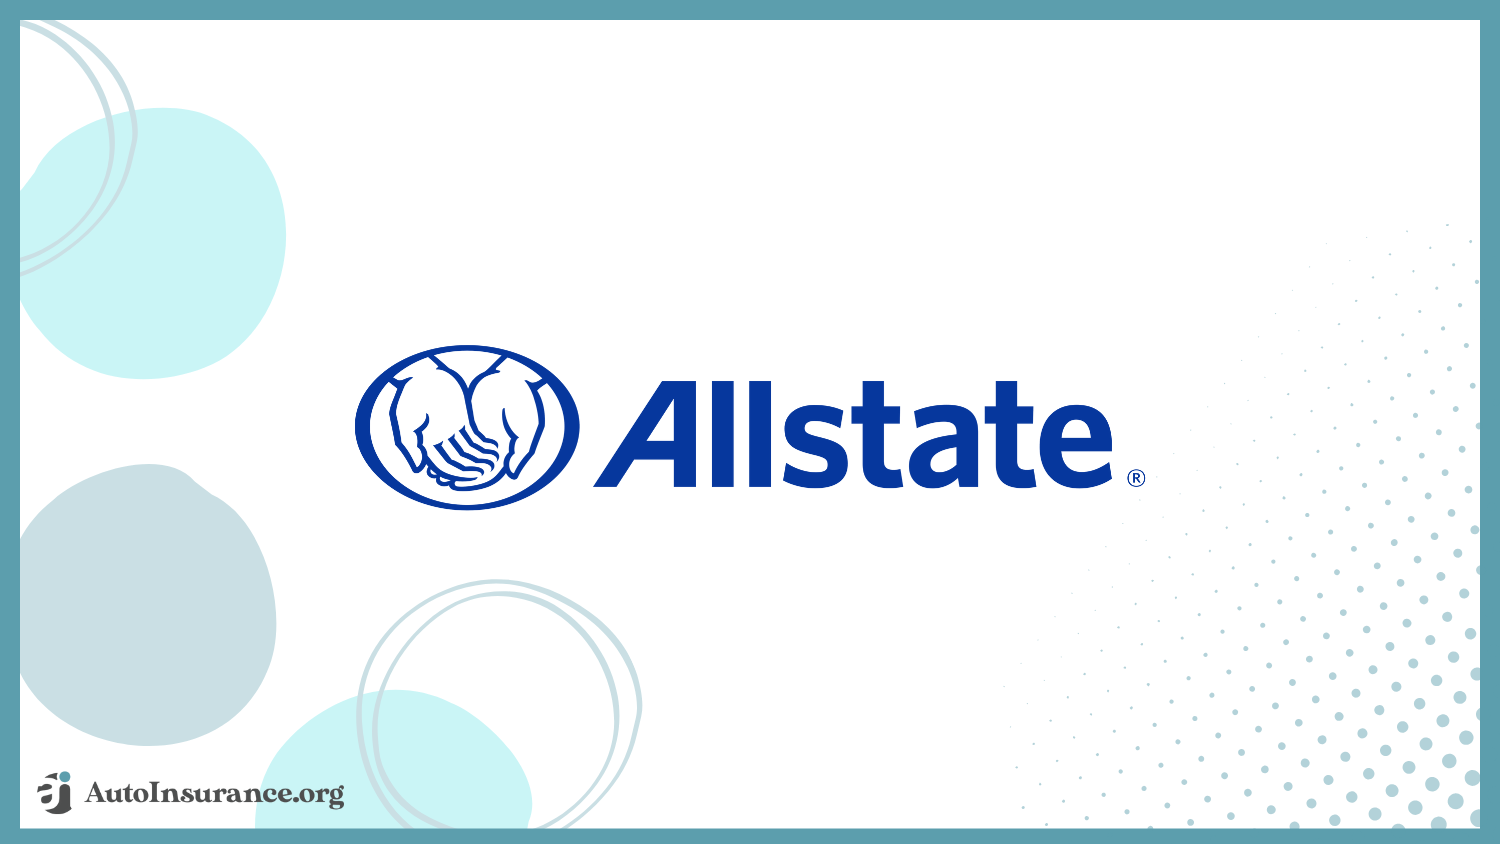 Allstate: Best Auto Insurance for Undocumented Immigrants